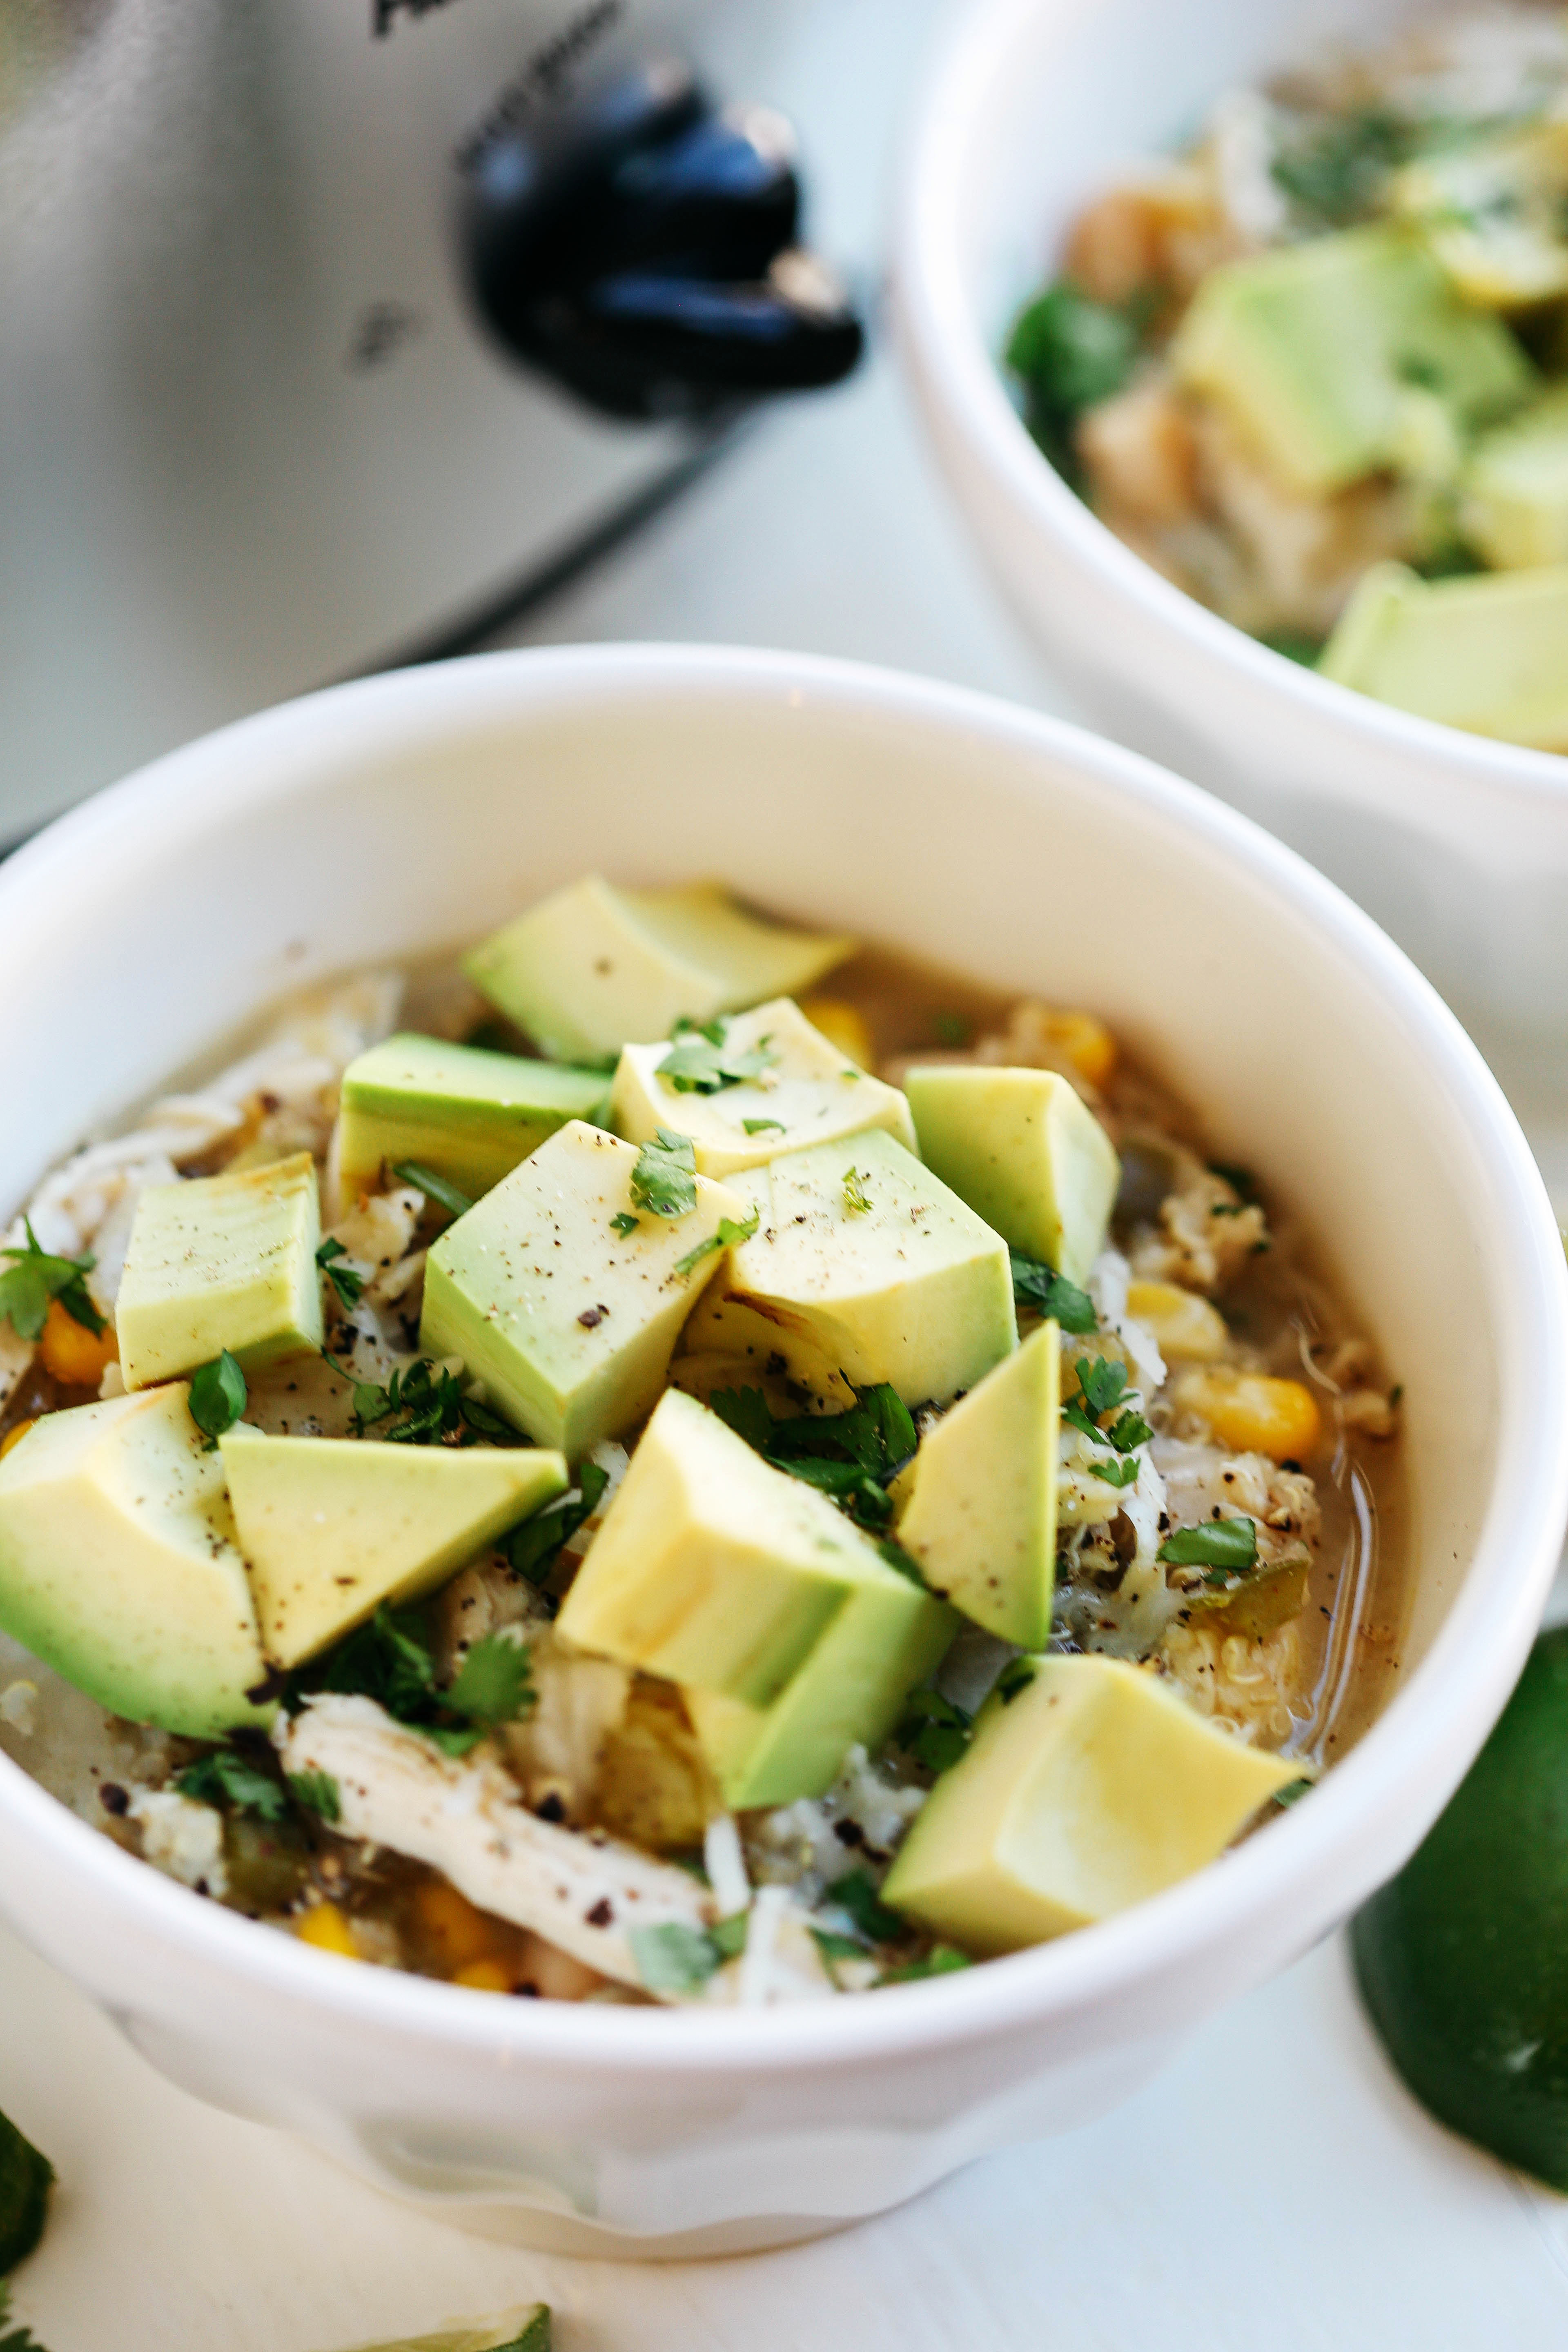 This Slow Cooker White Chicken and Quinoa Chili is the perfect blend of hearty and healthy that will keep you warm and cozy all winter long!